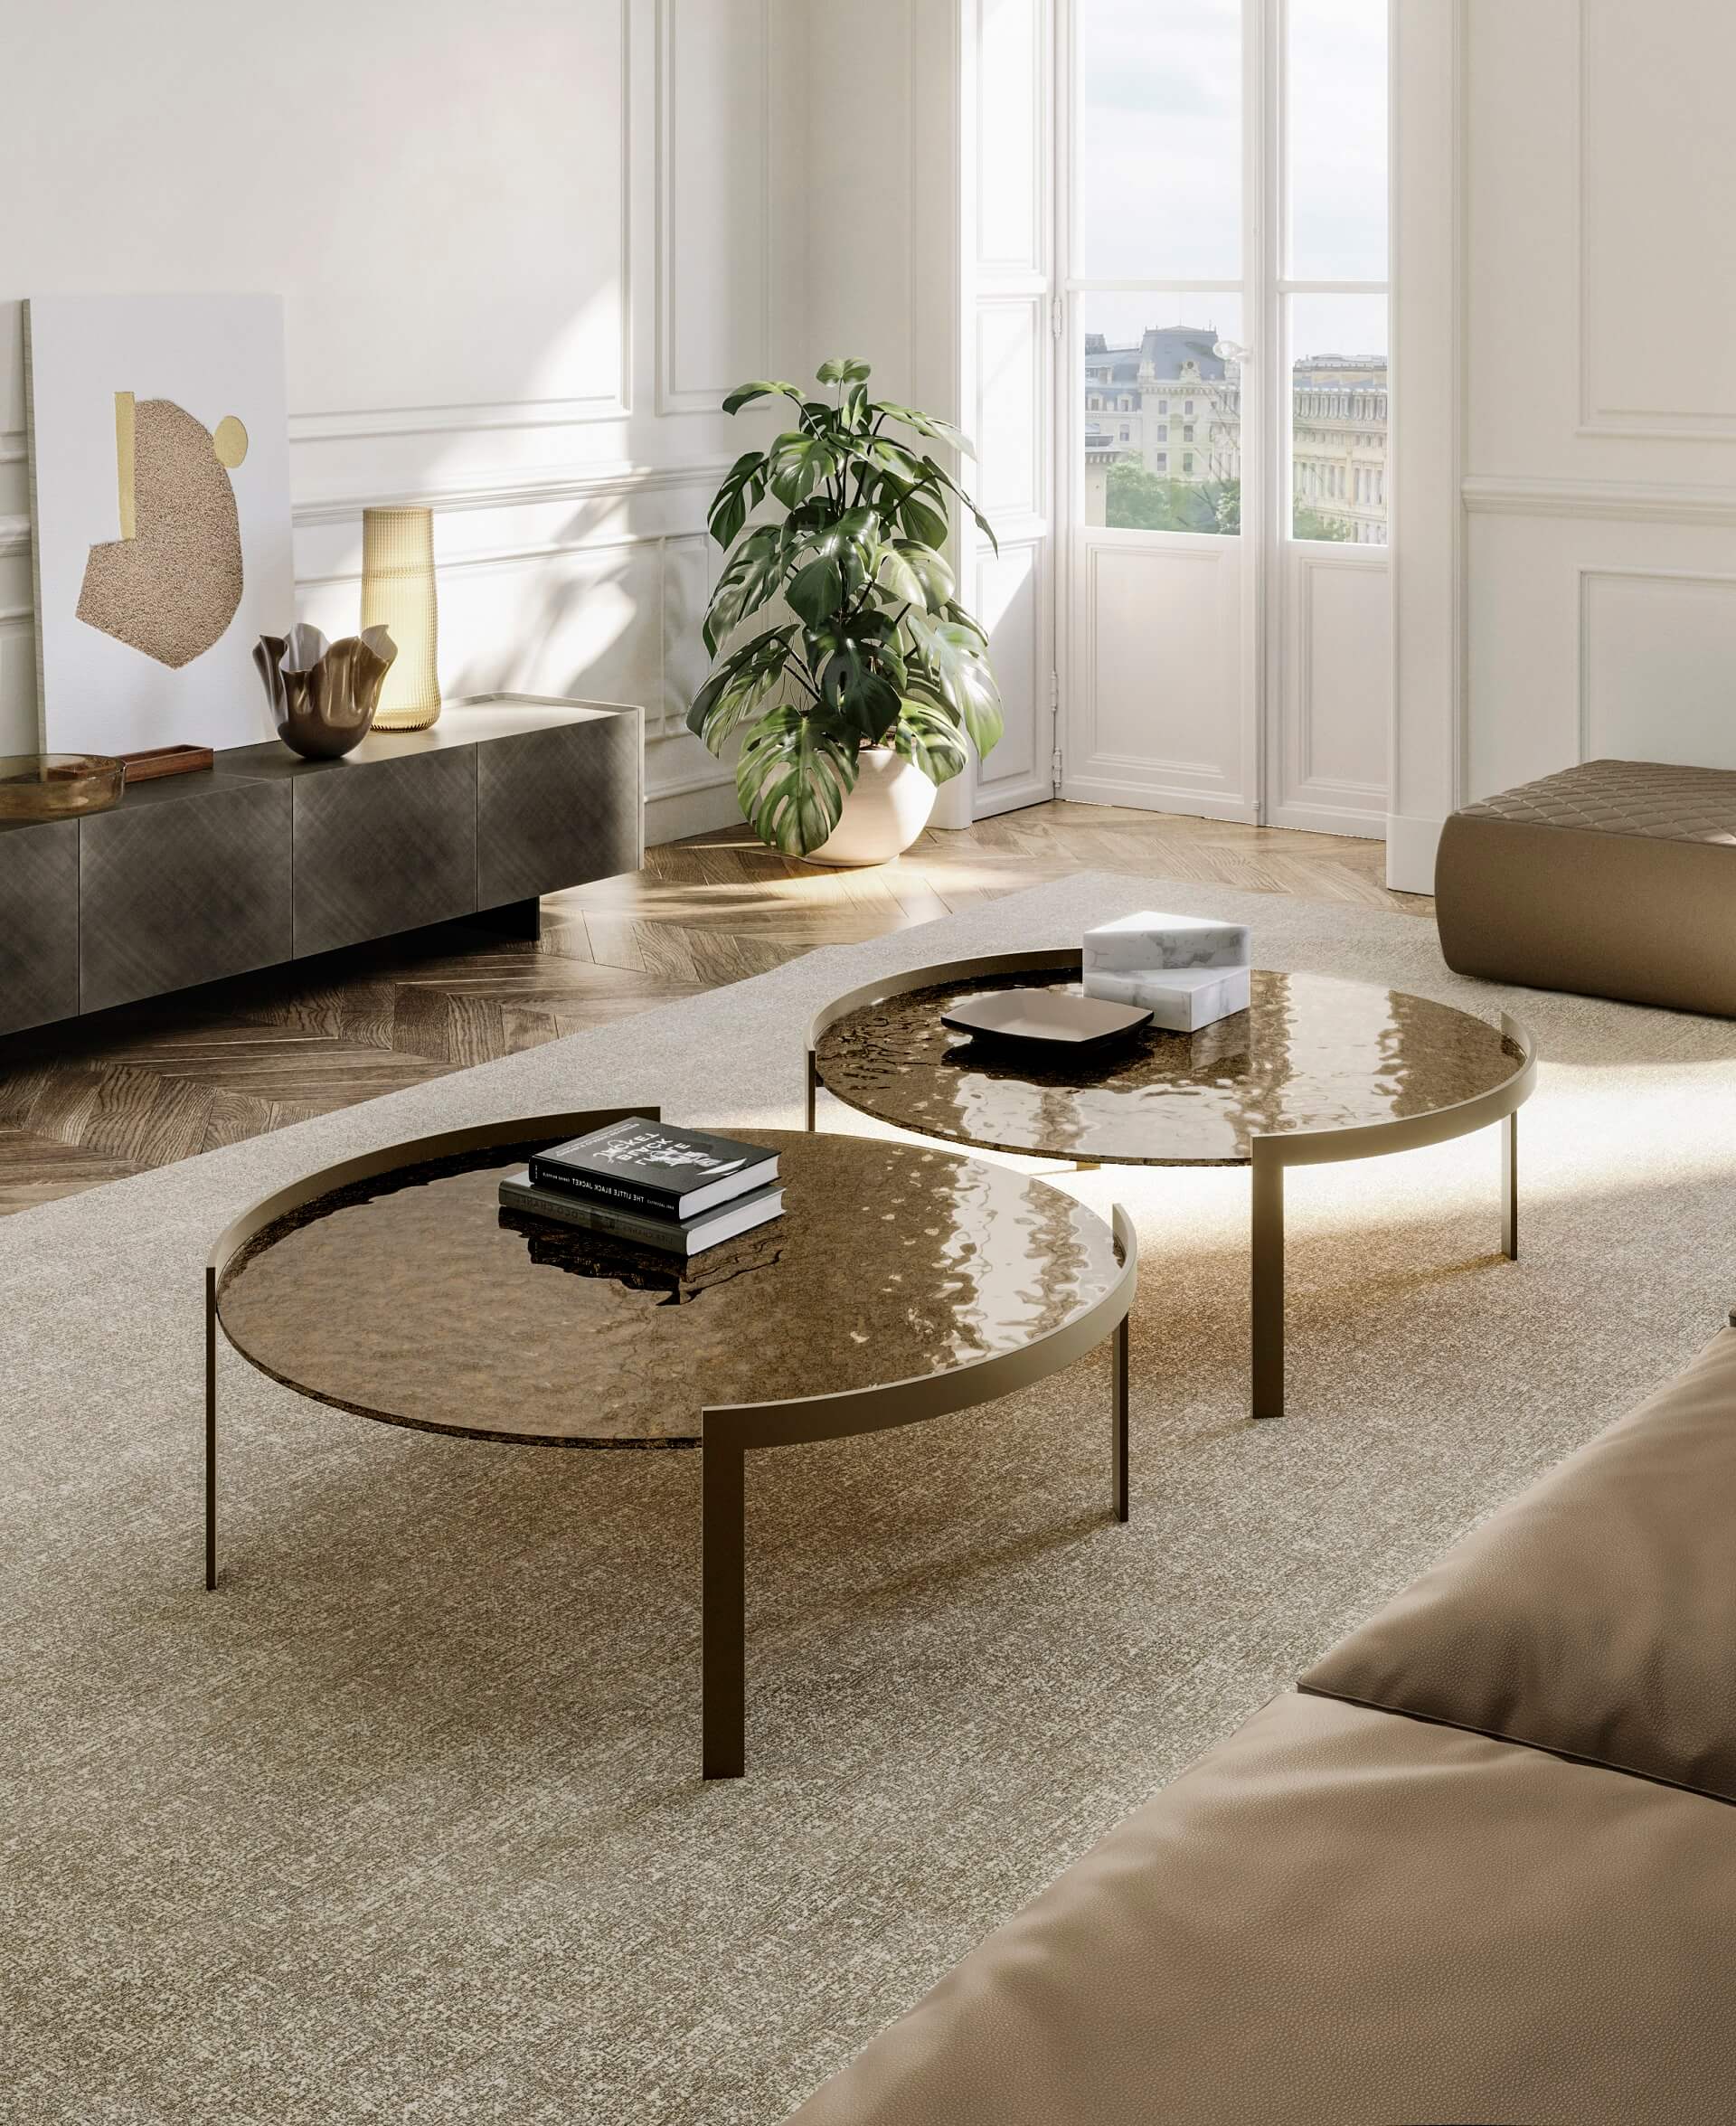 Eforma_Perry coffee table